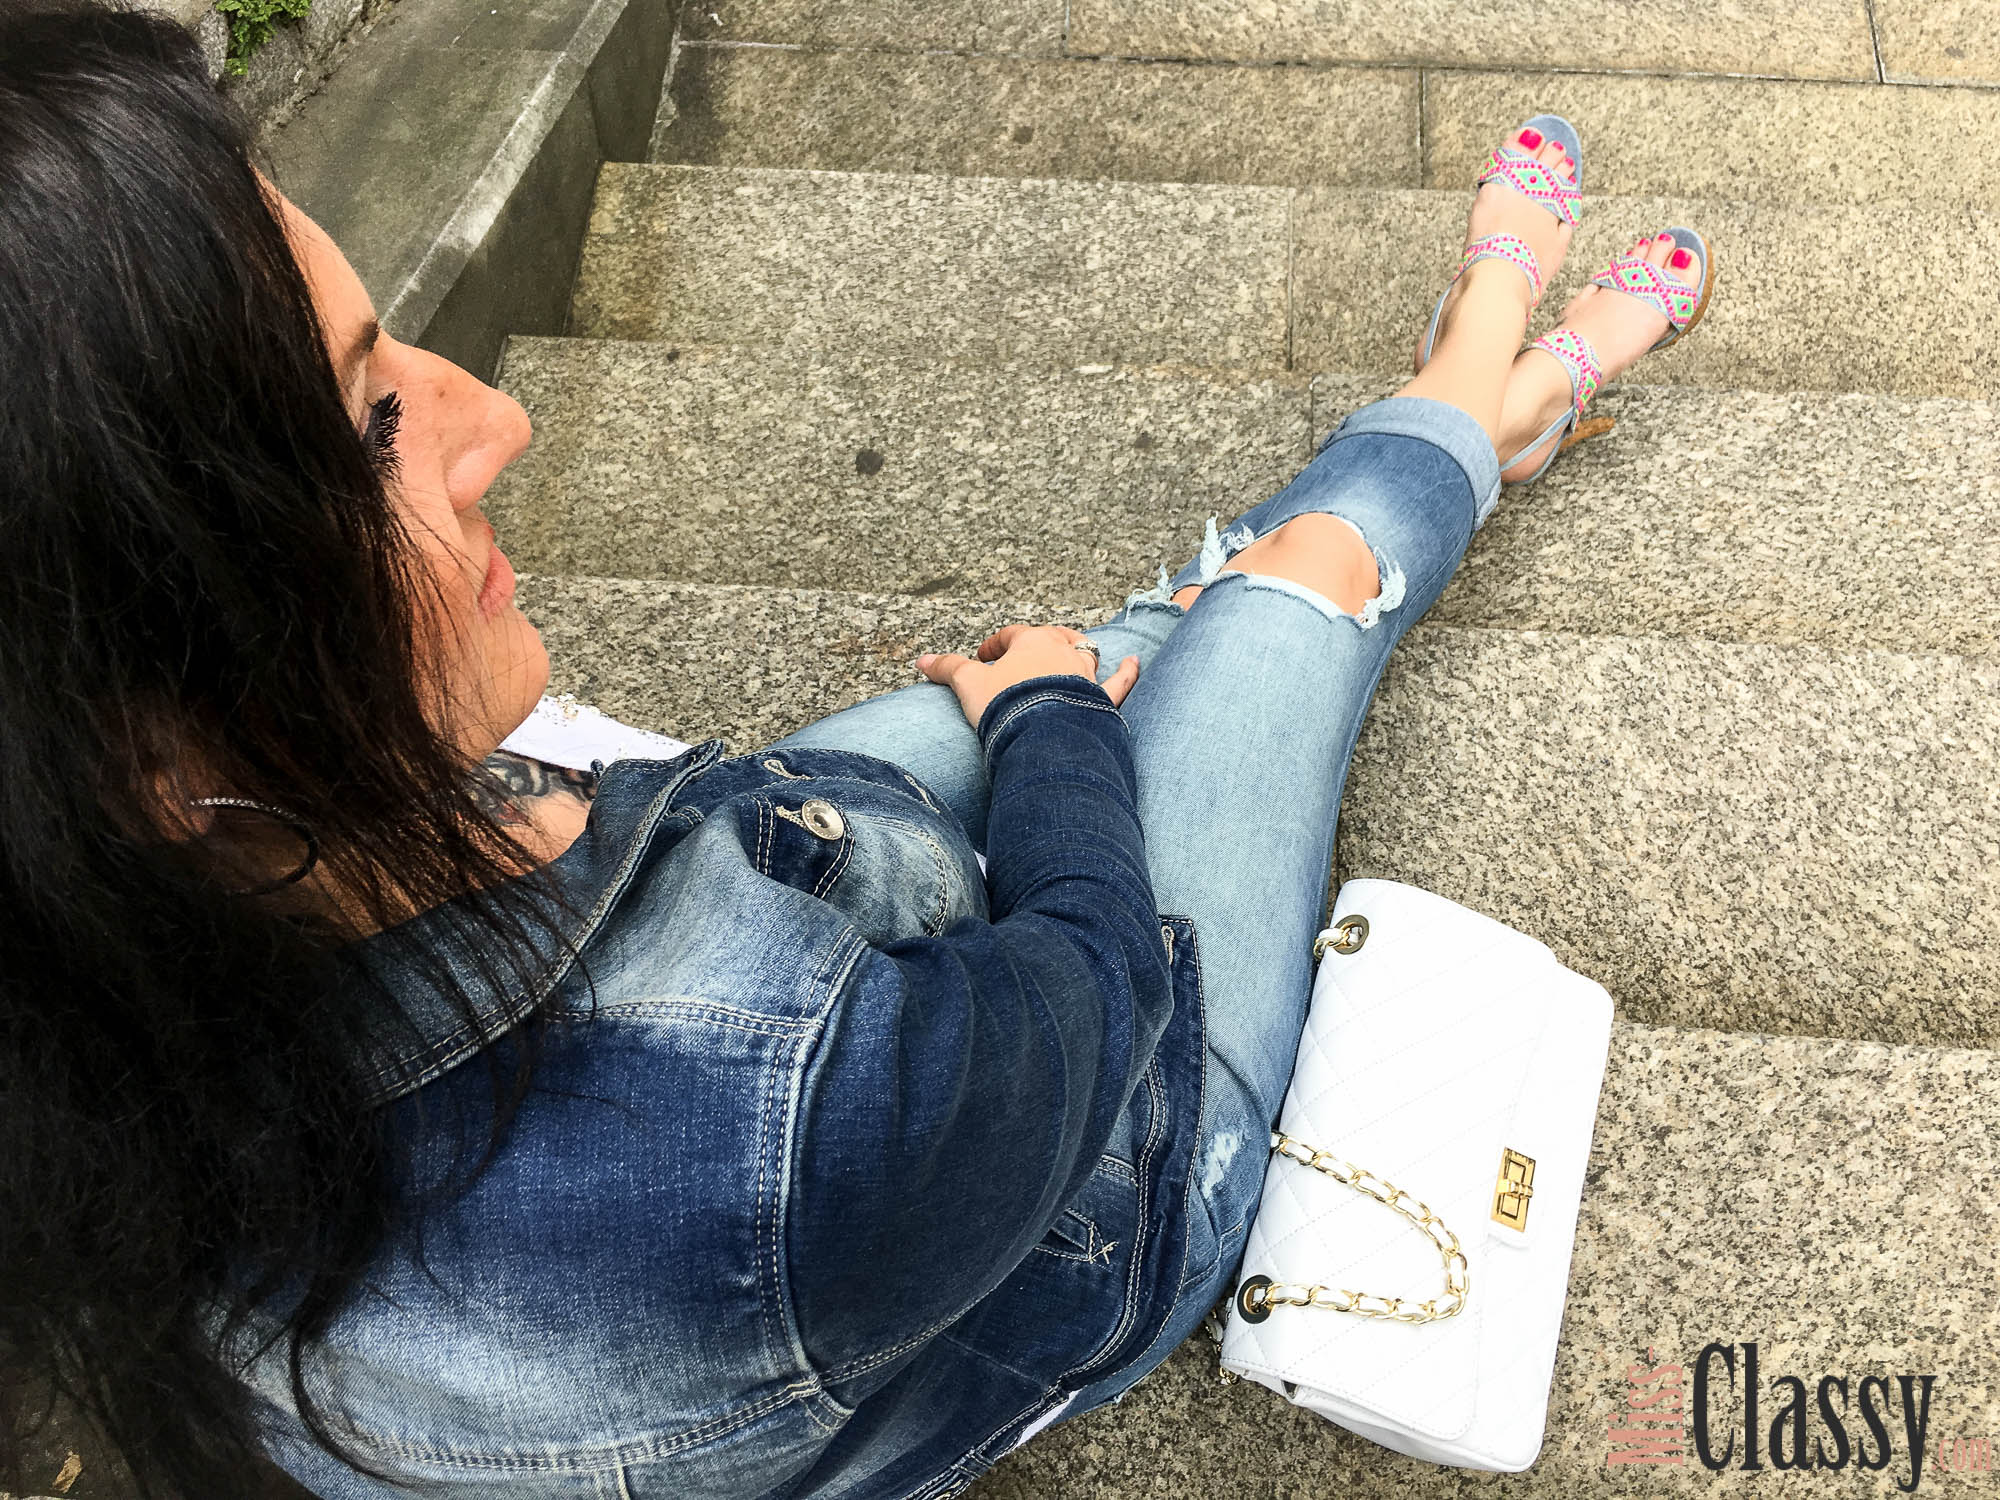 Destroyed Jeans in the City - Graz - Guess - High Heels - Jeansjacke - Burberry Sonnenbrille